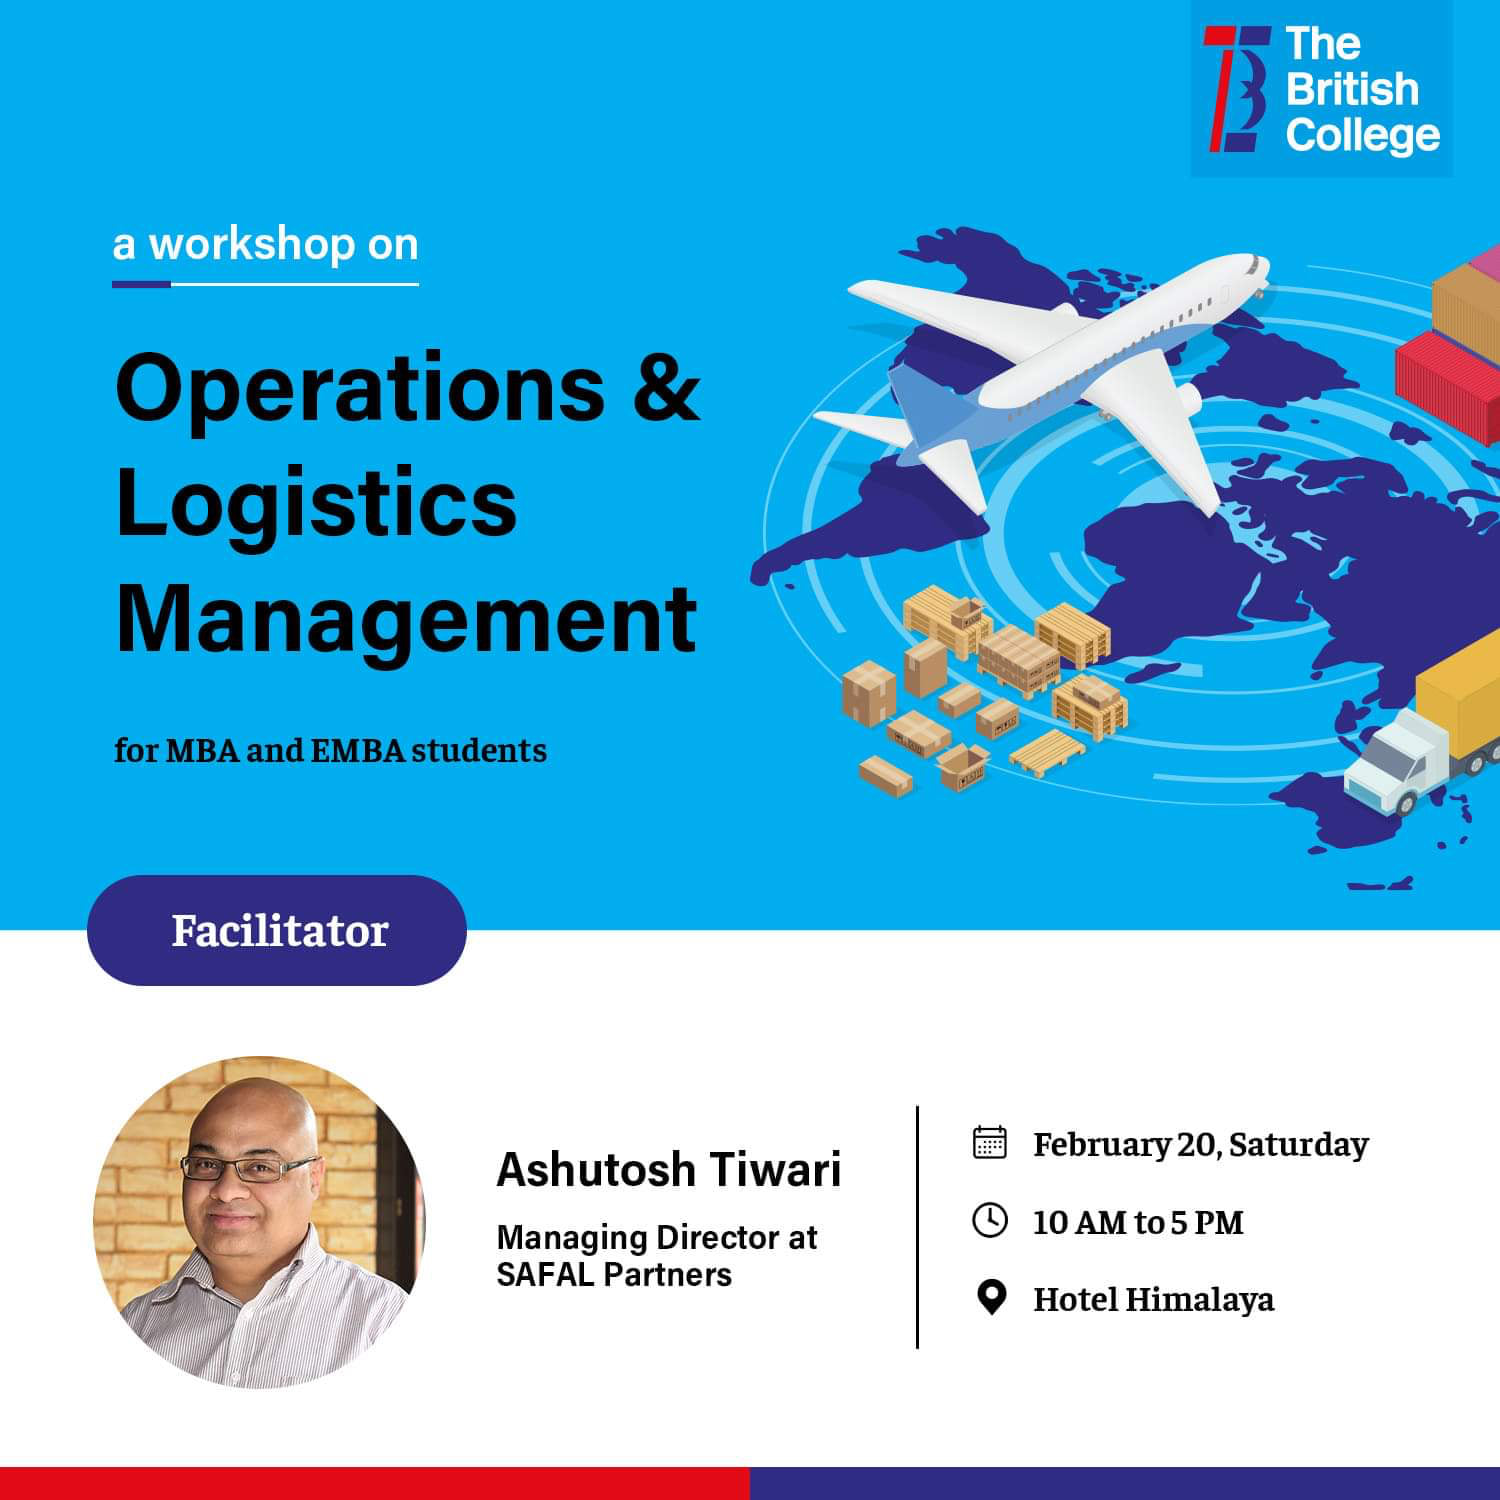 Workshop on Operations and Logistics Management for MBA & EMBA students